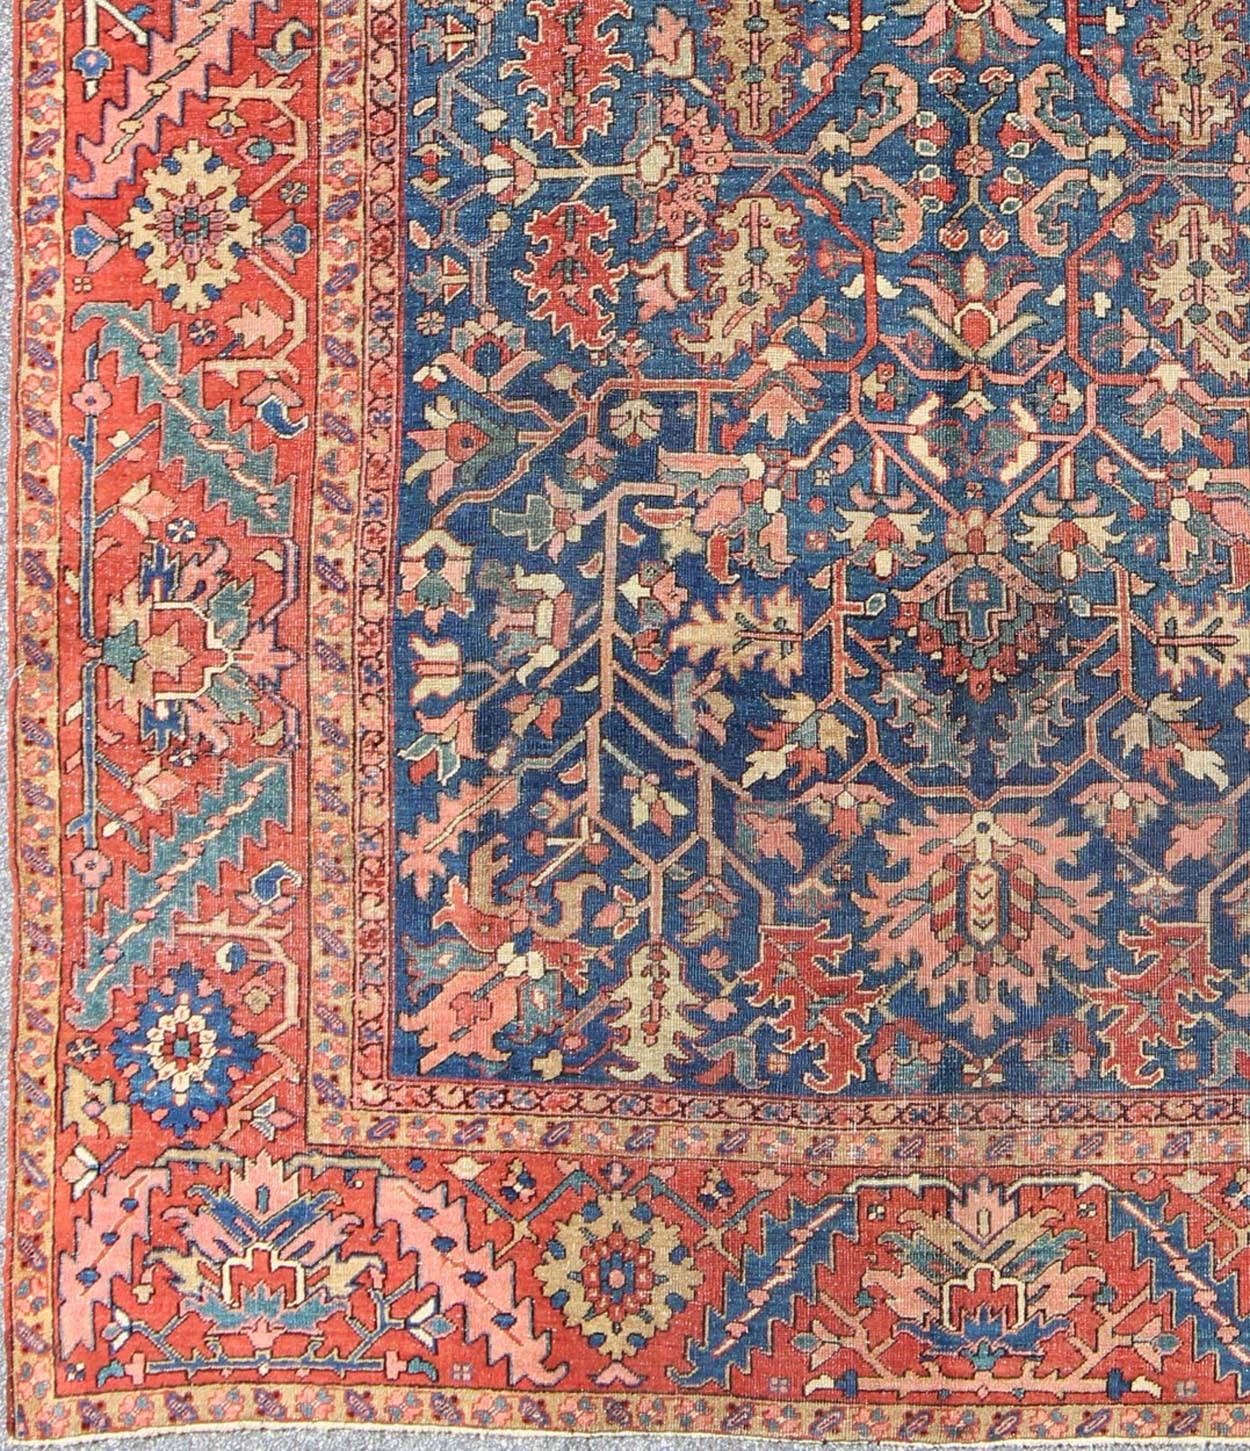 Antique All Over Persian Heriz-Serapi Geometric Rug in Midnight Blue Color. Rug/13-1201,  
Made in the early 20th Century, this antique Heriz-Serapi is characterized primarily by its pleasing allover pattern, which beautifully unfolds across the